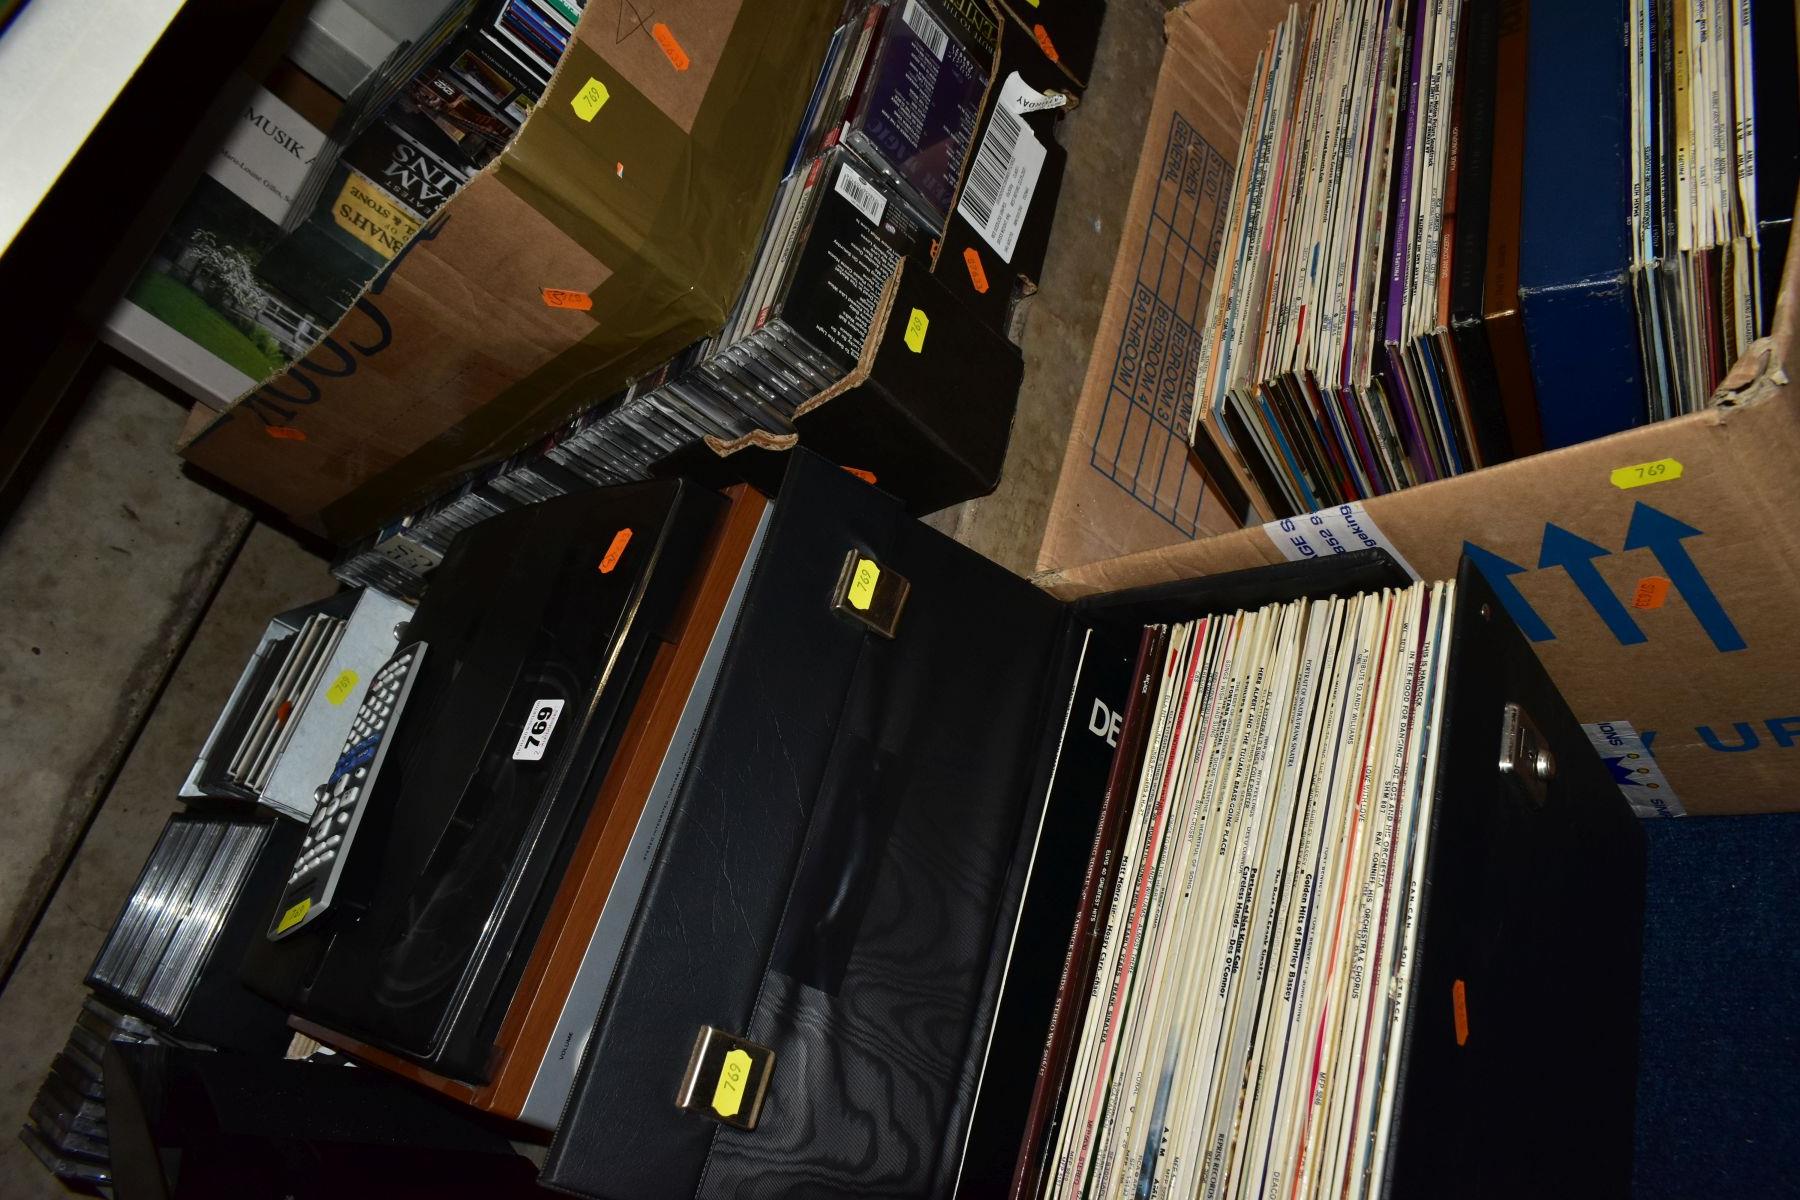 A COLLECTION OF LPs, CDs, TAPES AND AUDIO EQUIPMENT including approximately ninety LPs from